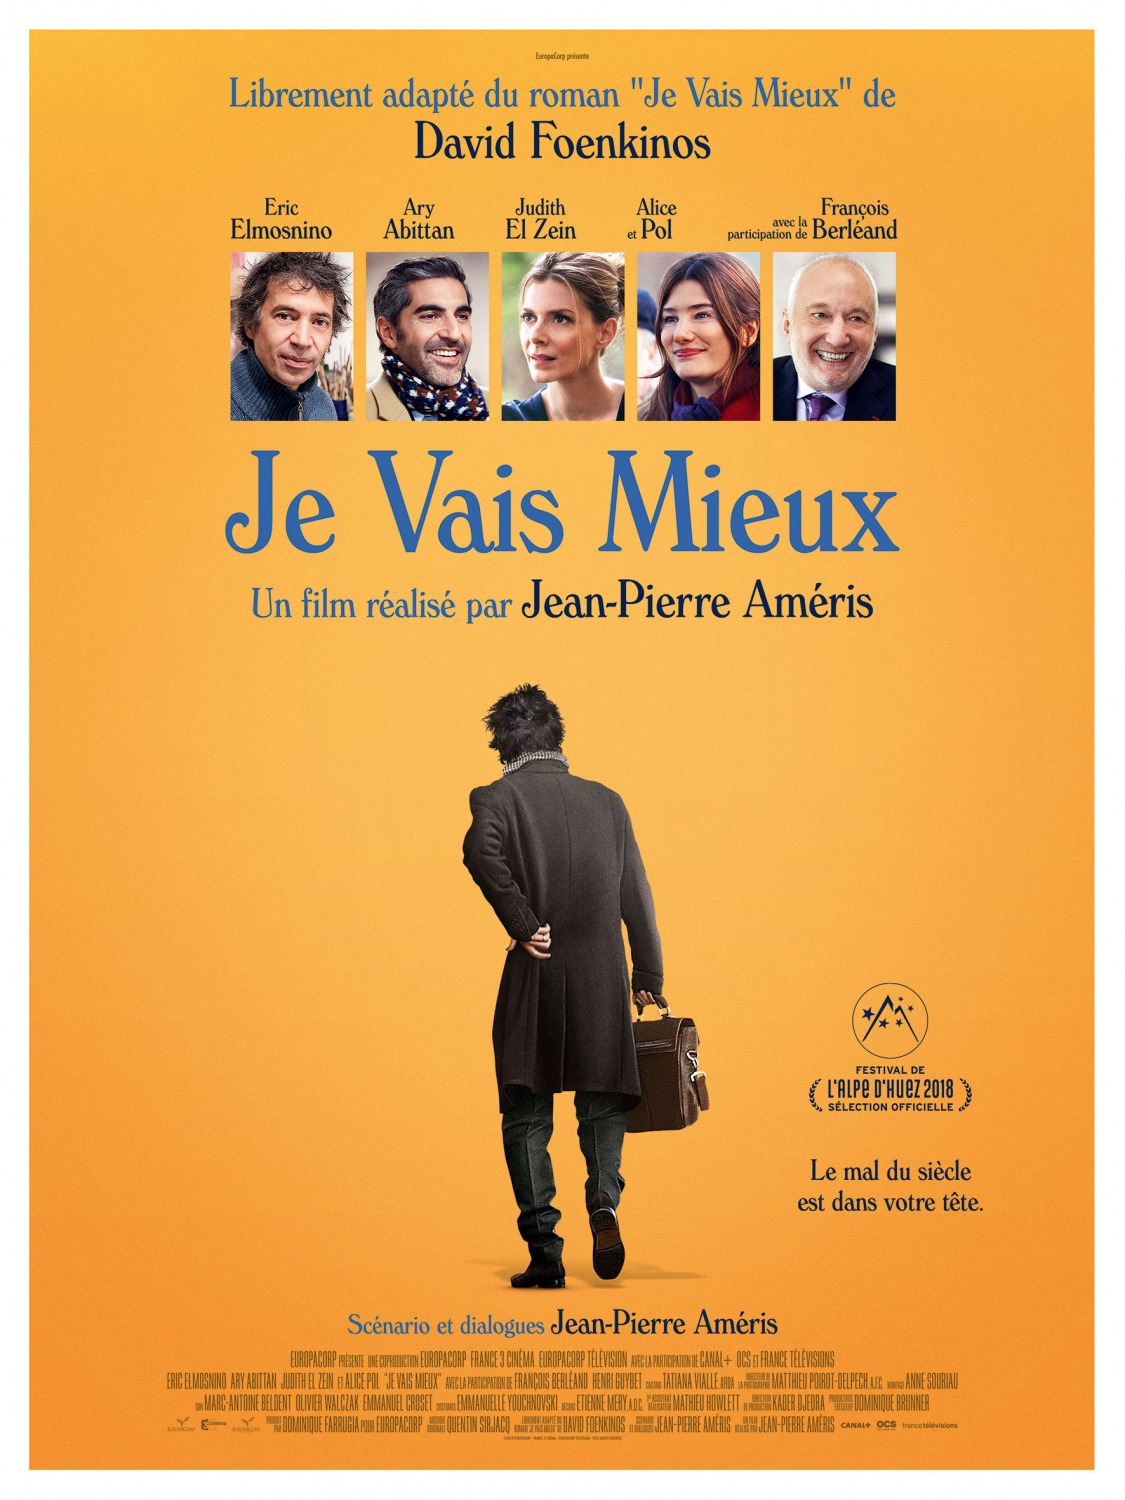 Extra Large Movie Poster Image for Je vais mieux 